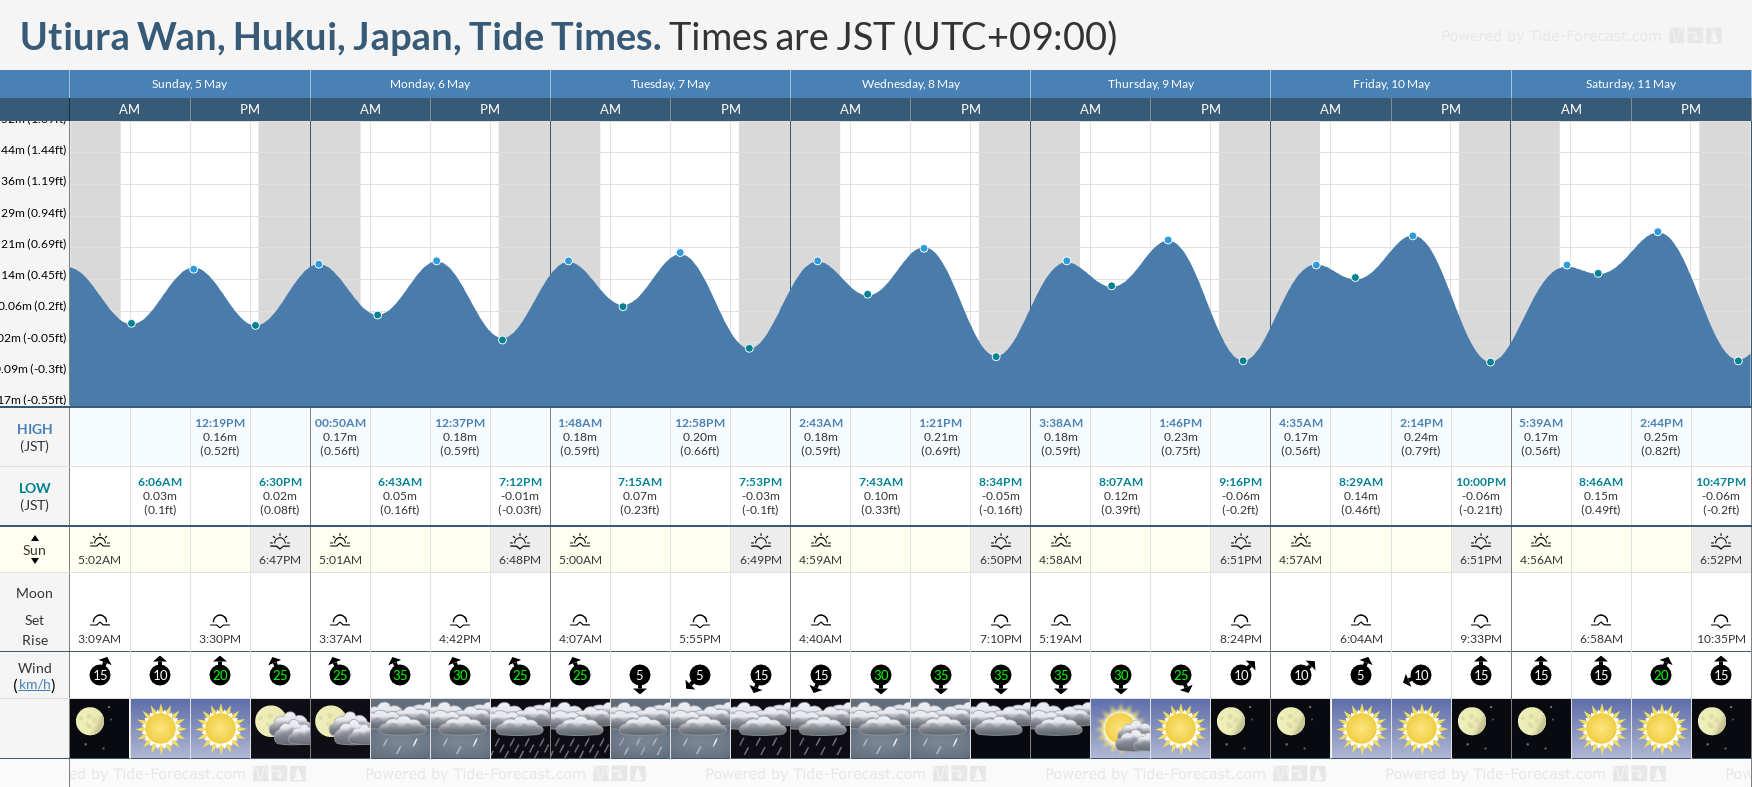 Utiura Wan, Hukui, Japan Tide Chart including high and low tide tide times for the next 7 days